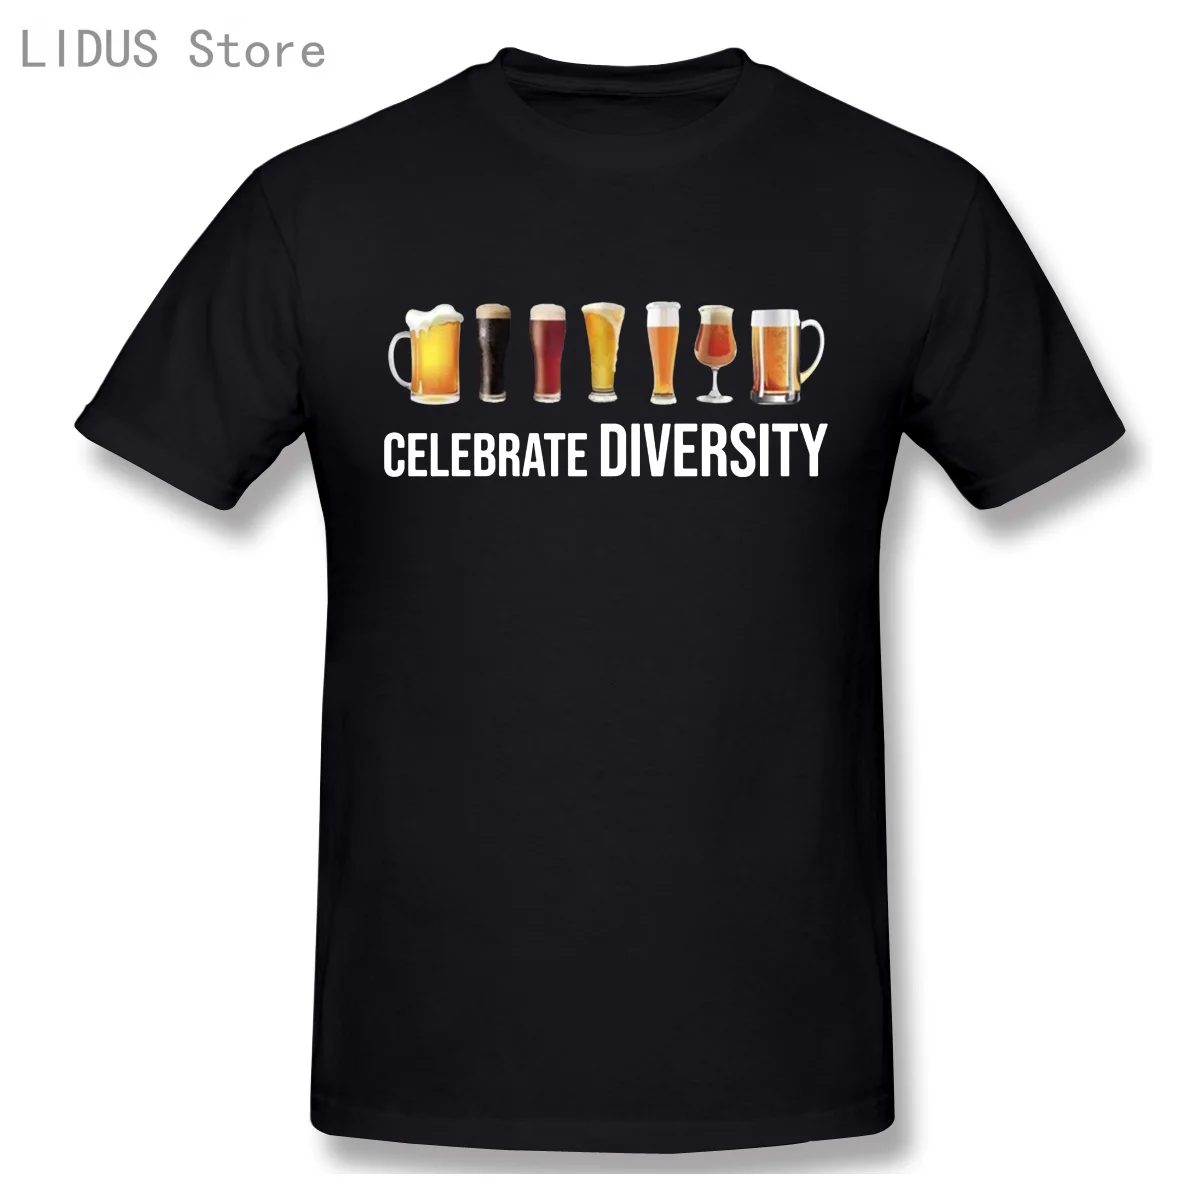 

Celebrate Diversity Beer Wine Beer Drinking Funny College Humor Mens New TShirt Men Fashion Cotton T-shirt